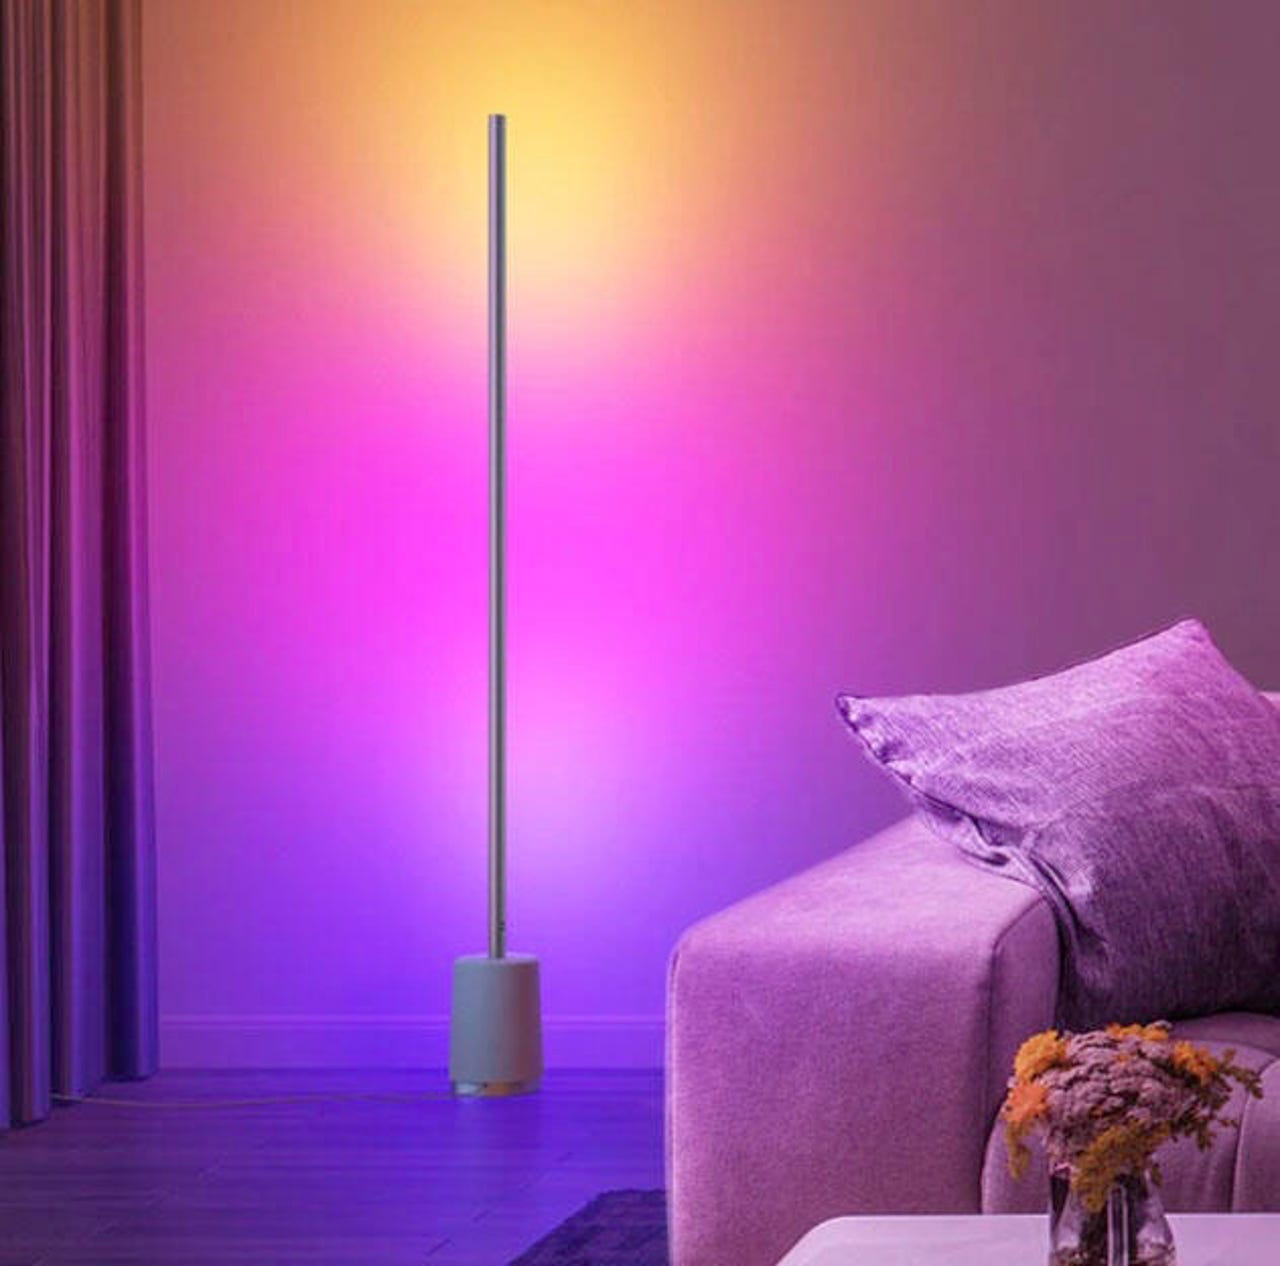 Govee Lights Reviewed: The Ultimate Smart Light Ideas